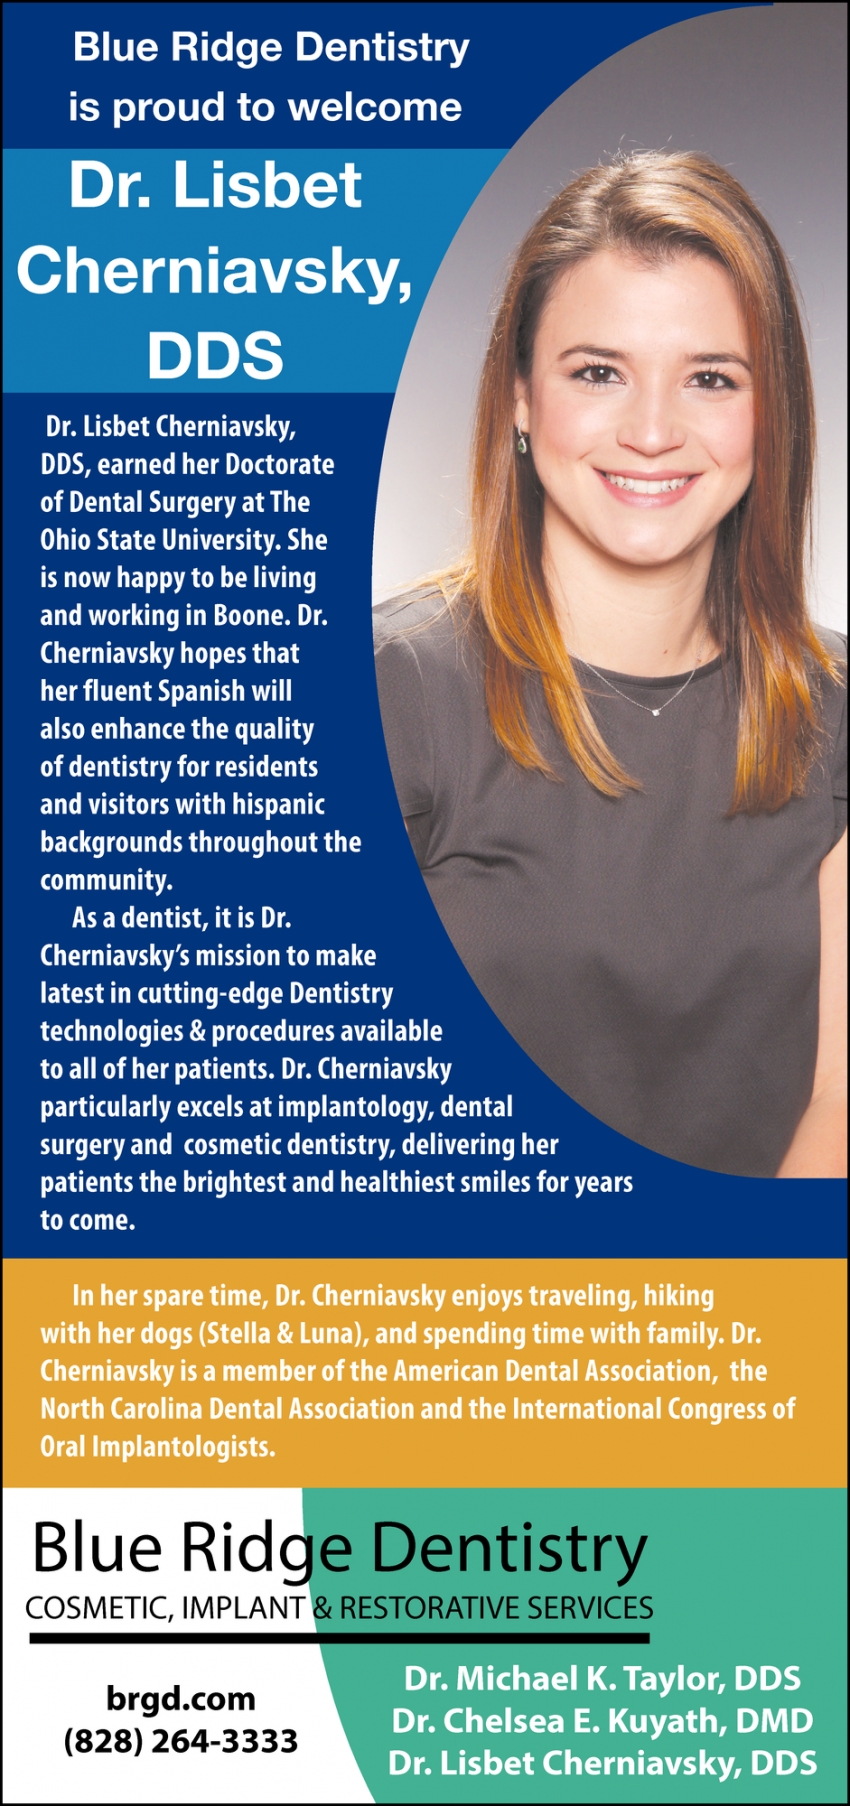 Proud to Welcome Dr. Lisbet Cherniavsky, DDS